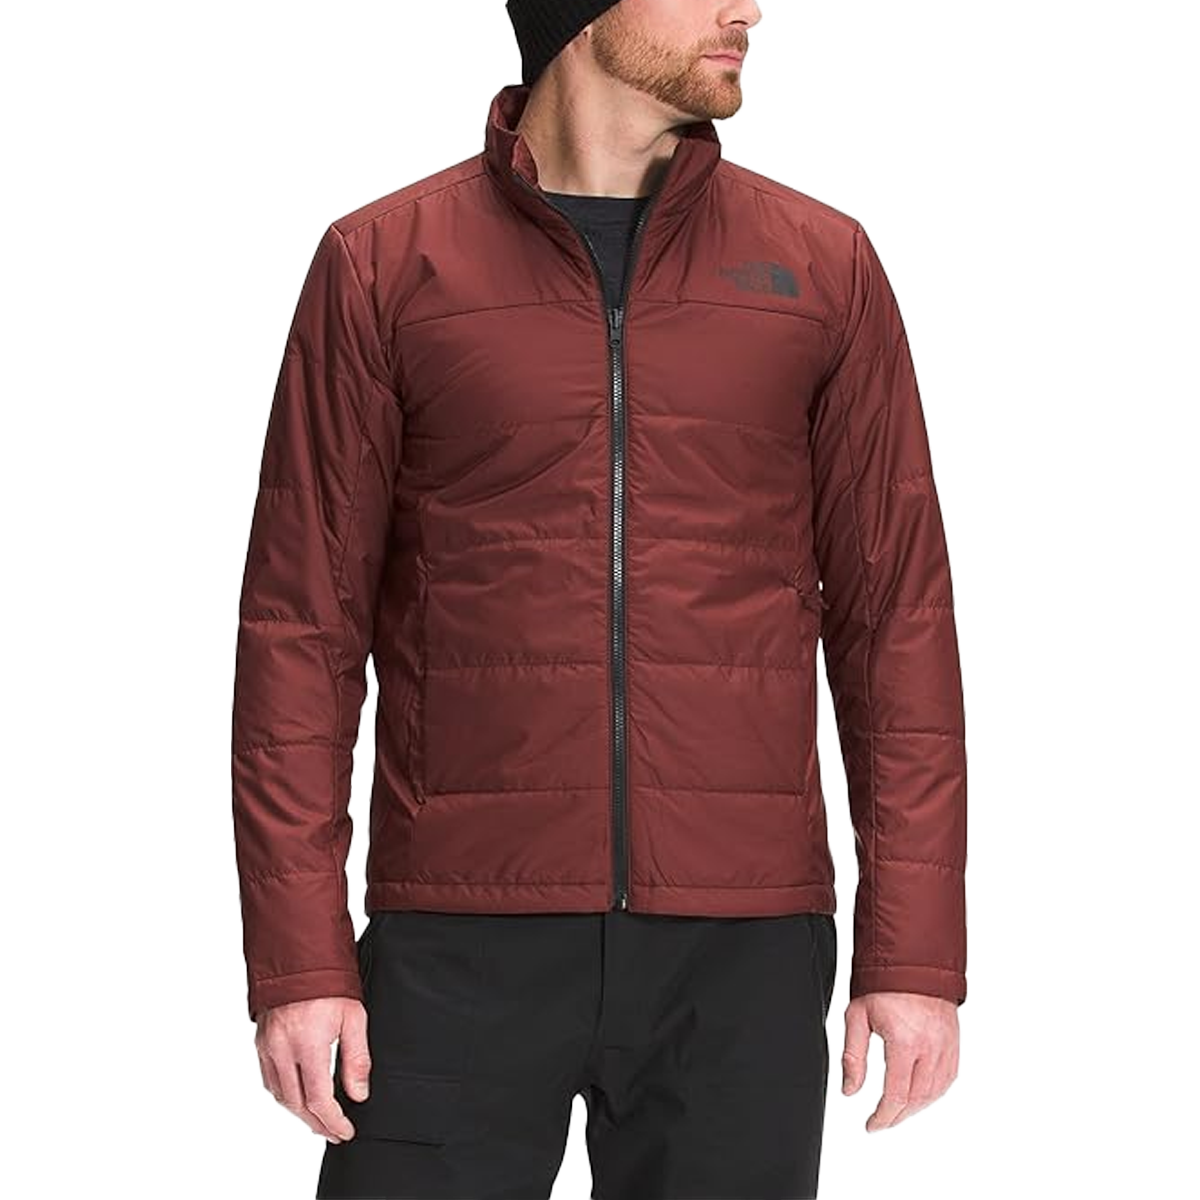 Men's Clement Triclimate Jacket alternate view